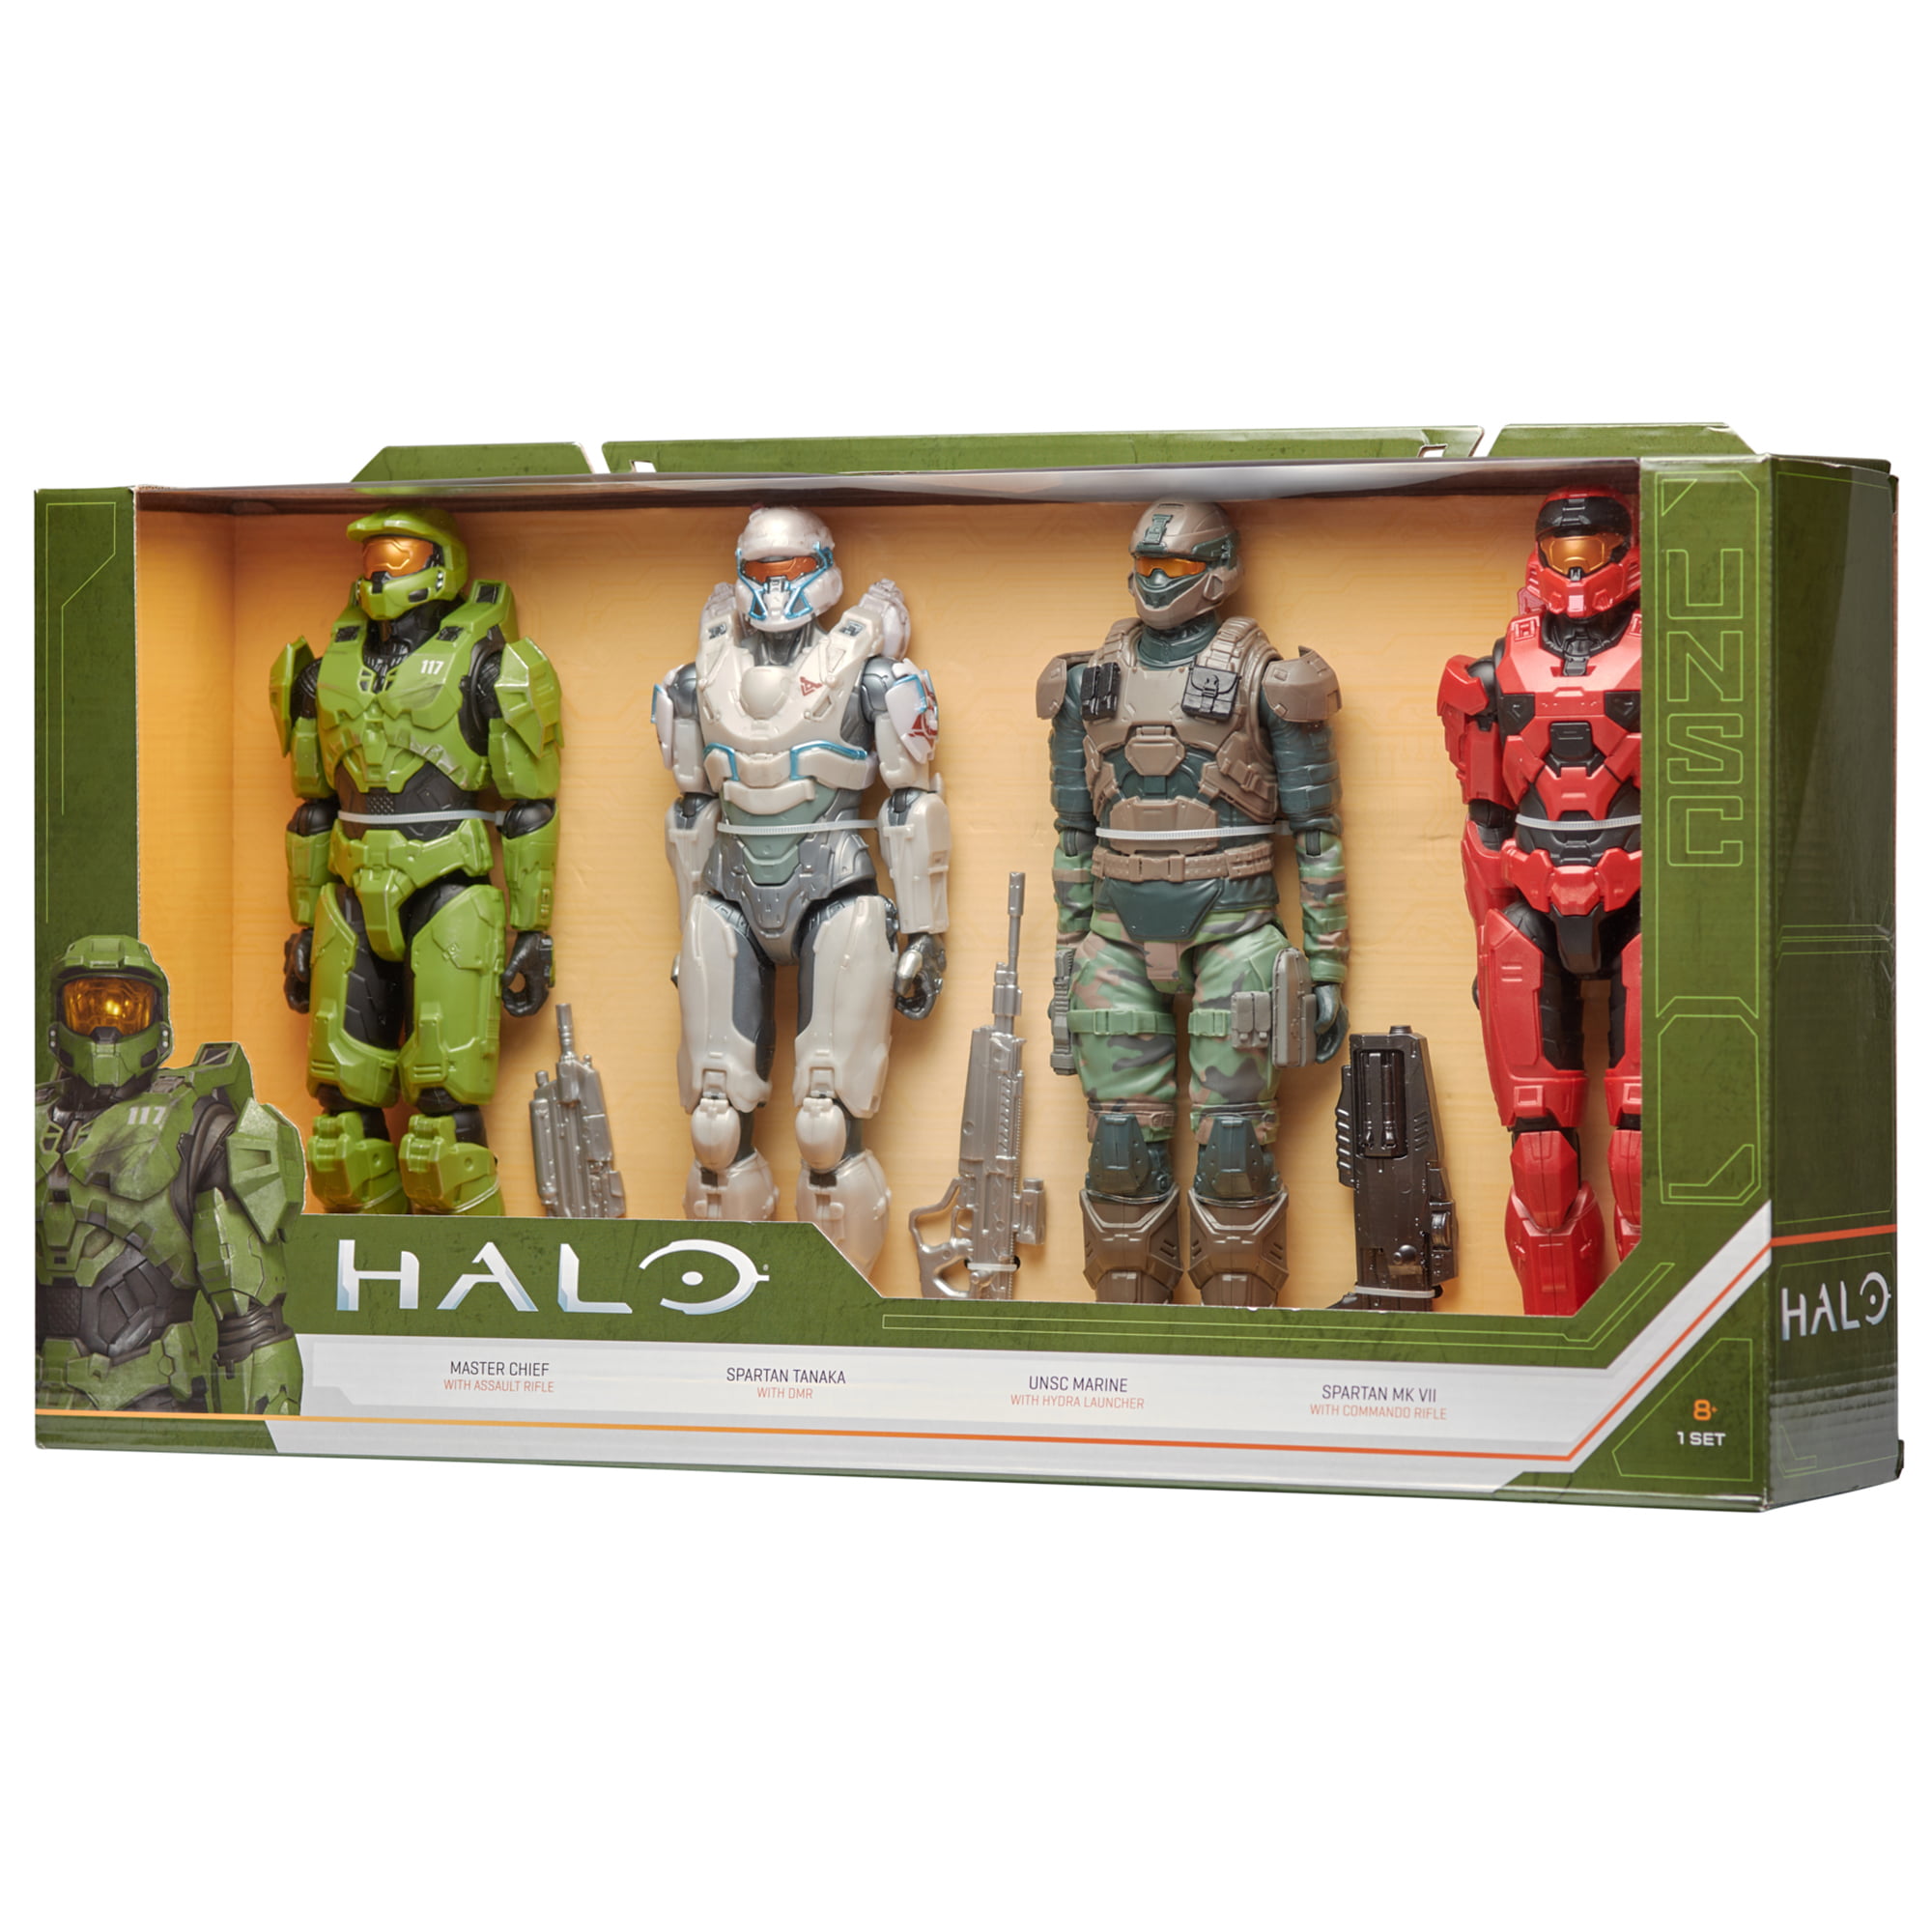 Halo Infinite UNSC Marine with Commando Rifle 4 inch Action Figure for sale online 